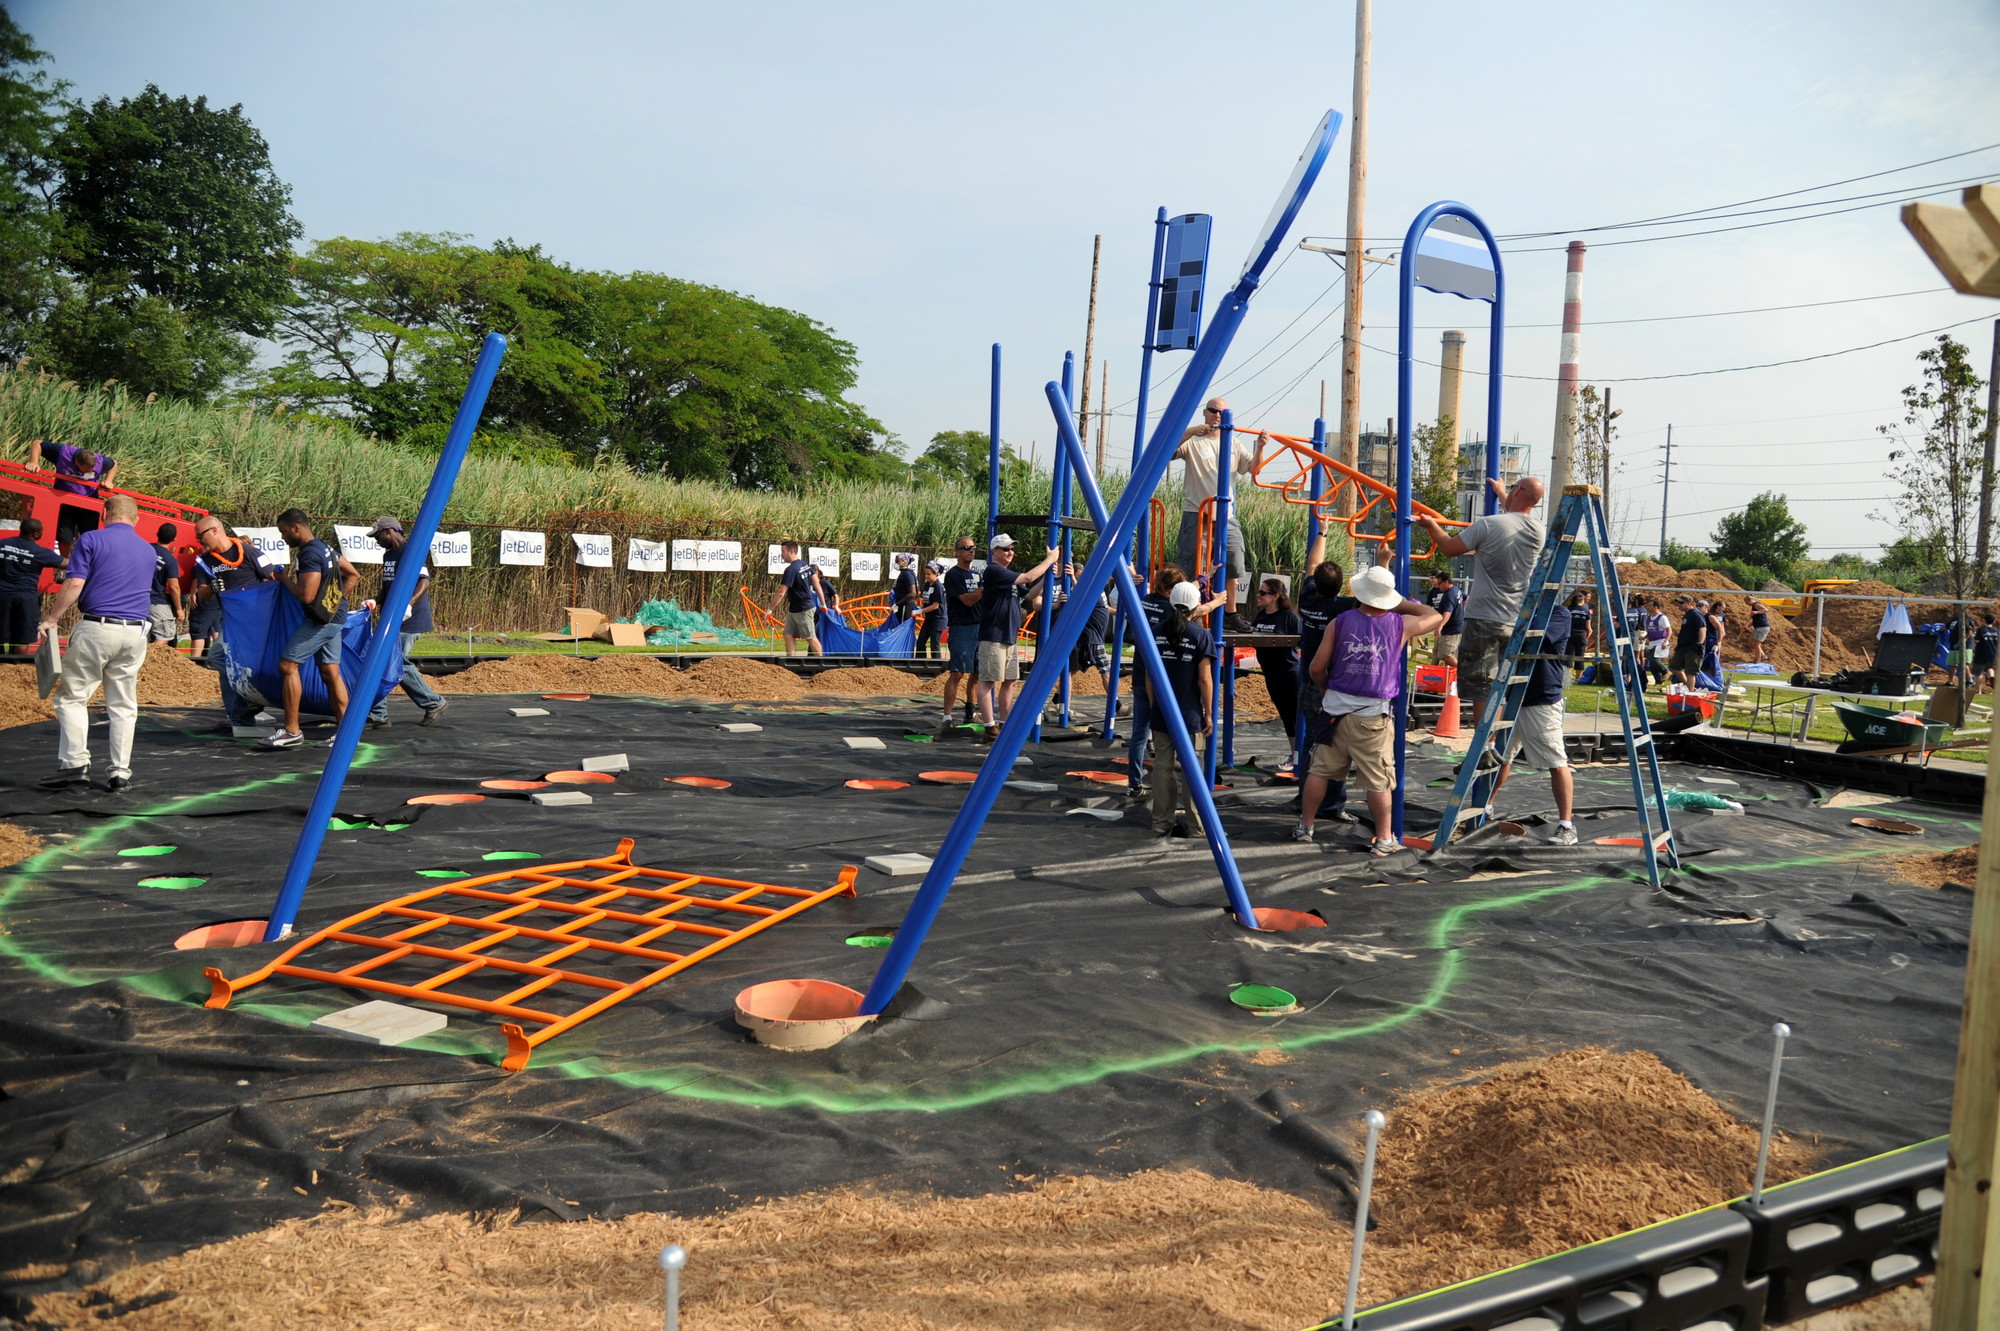 More than 200 volunteers helped to build a new park at 184 Waterford Road.